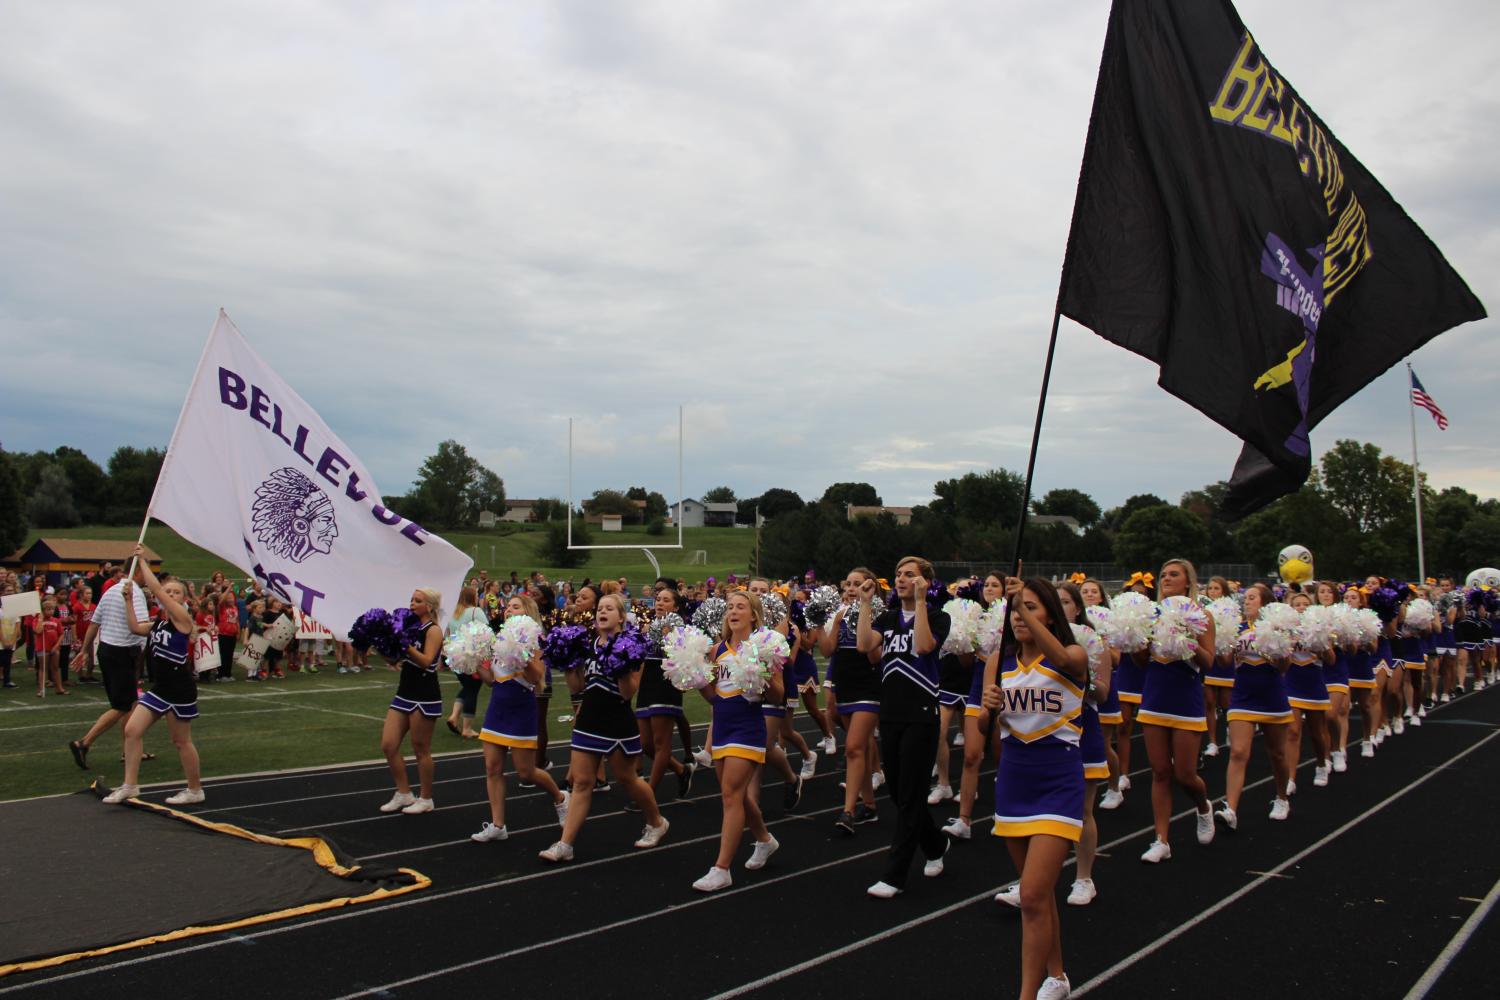 Cheerleaders and dance team members from both Bellevue West and Bellevue East walk together during the 2016 Unity Rally.